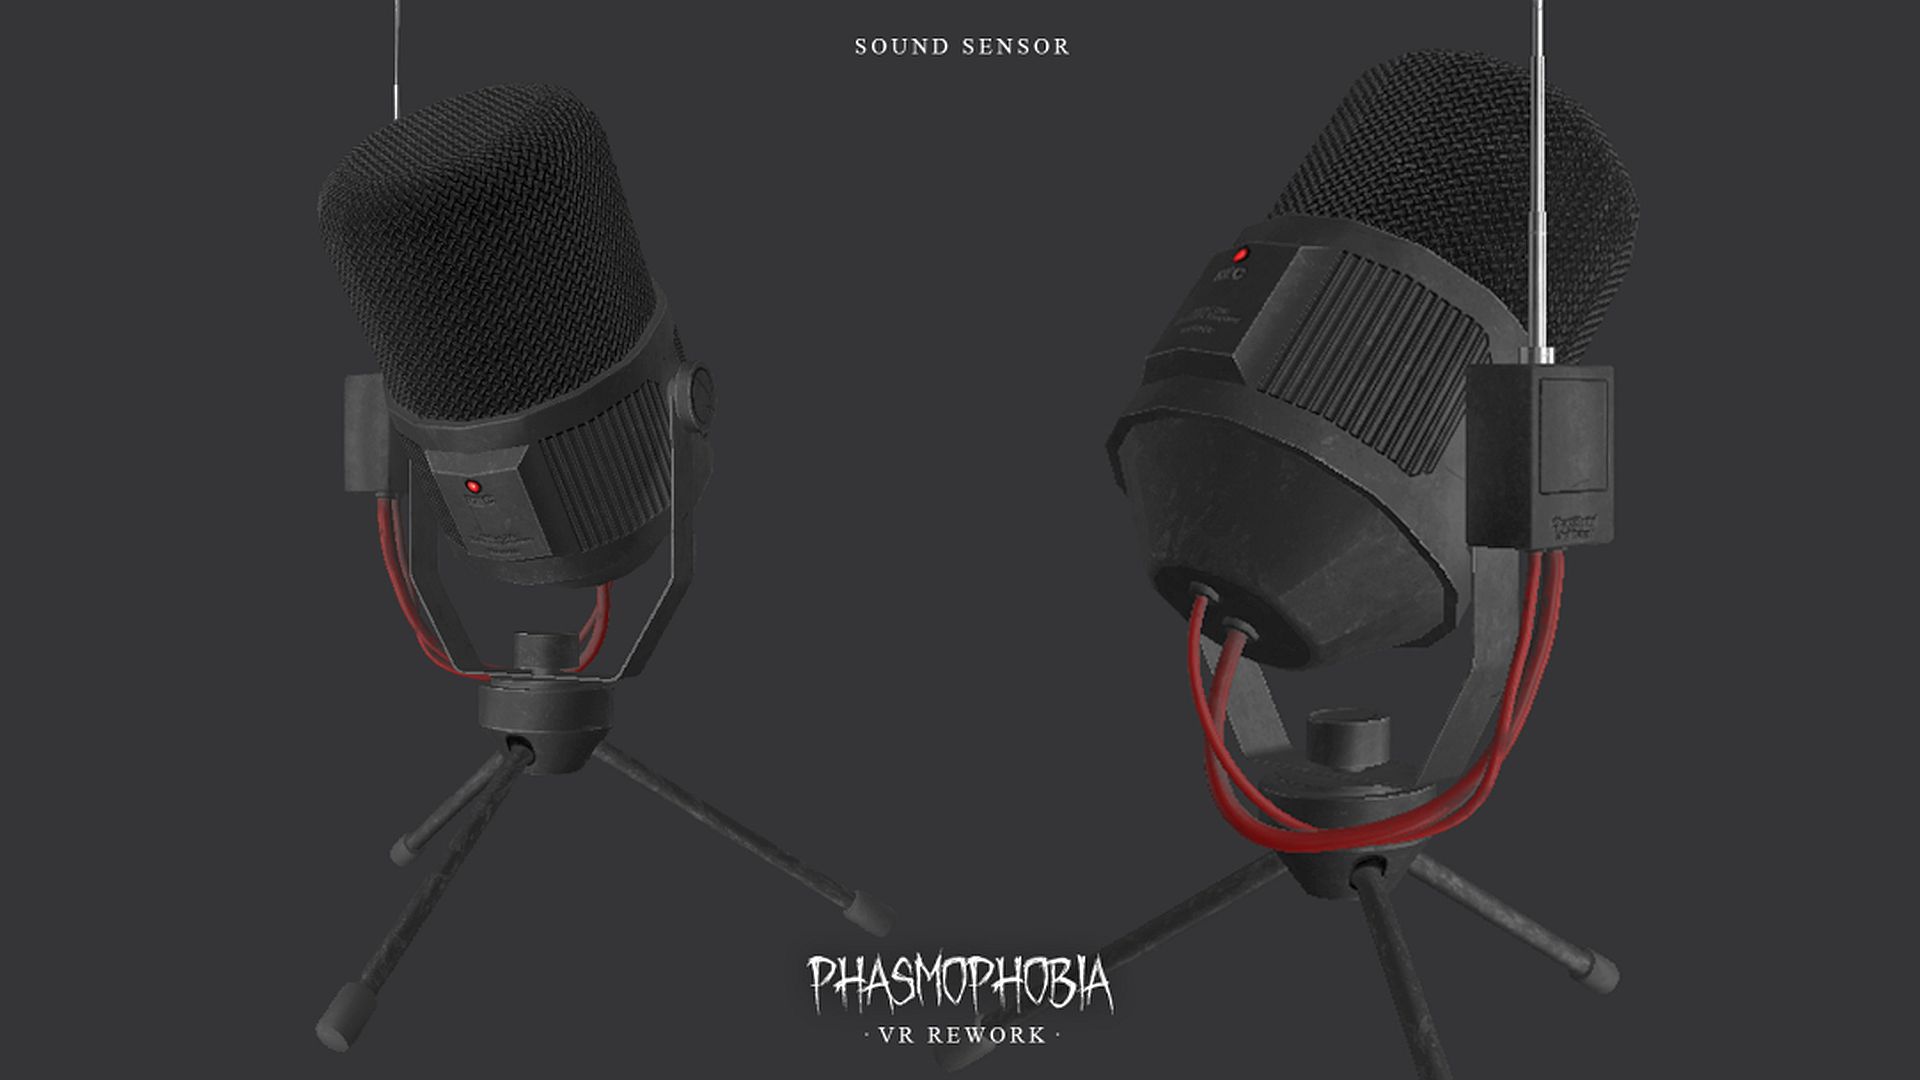 Phasmophobia devs reveal new sound sensor and tease “functionality adjustments”